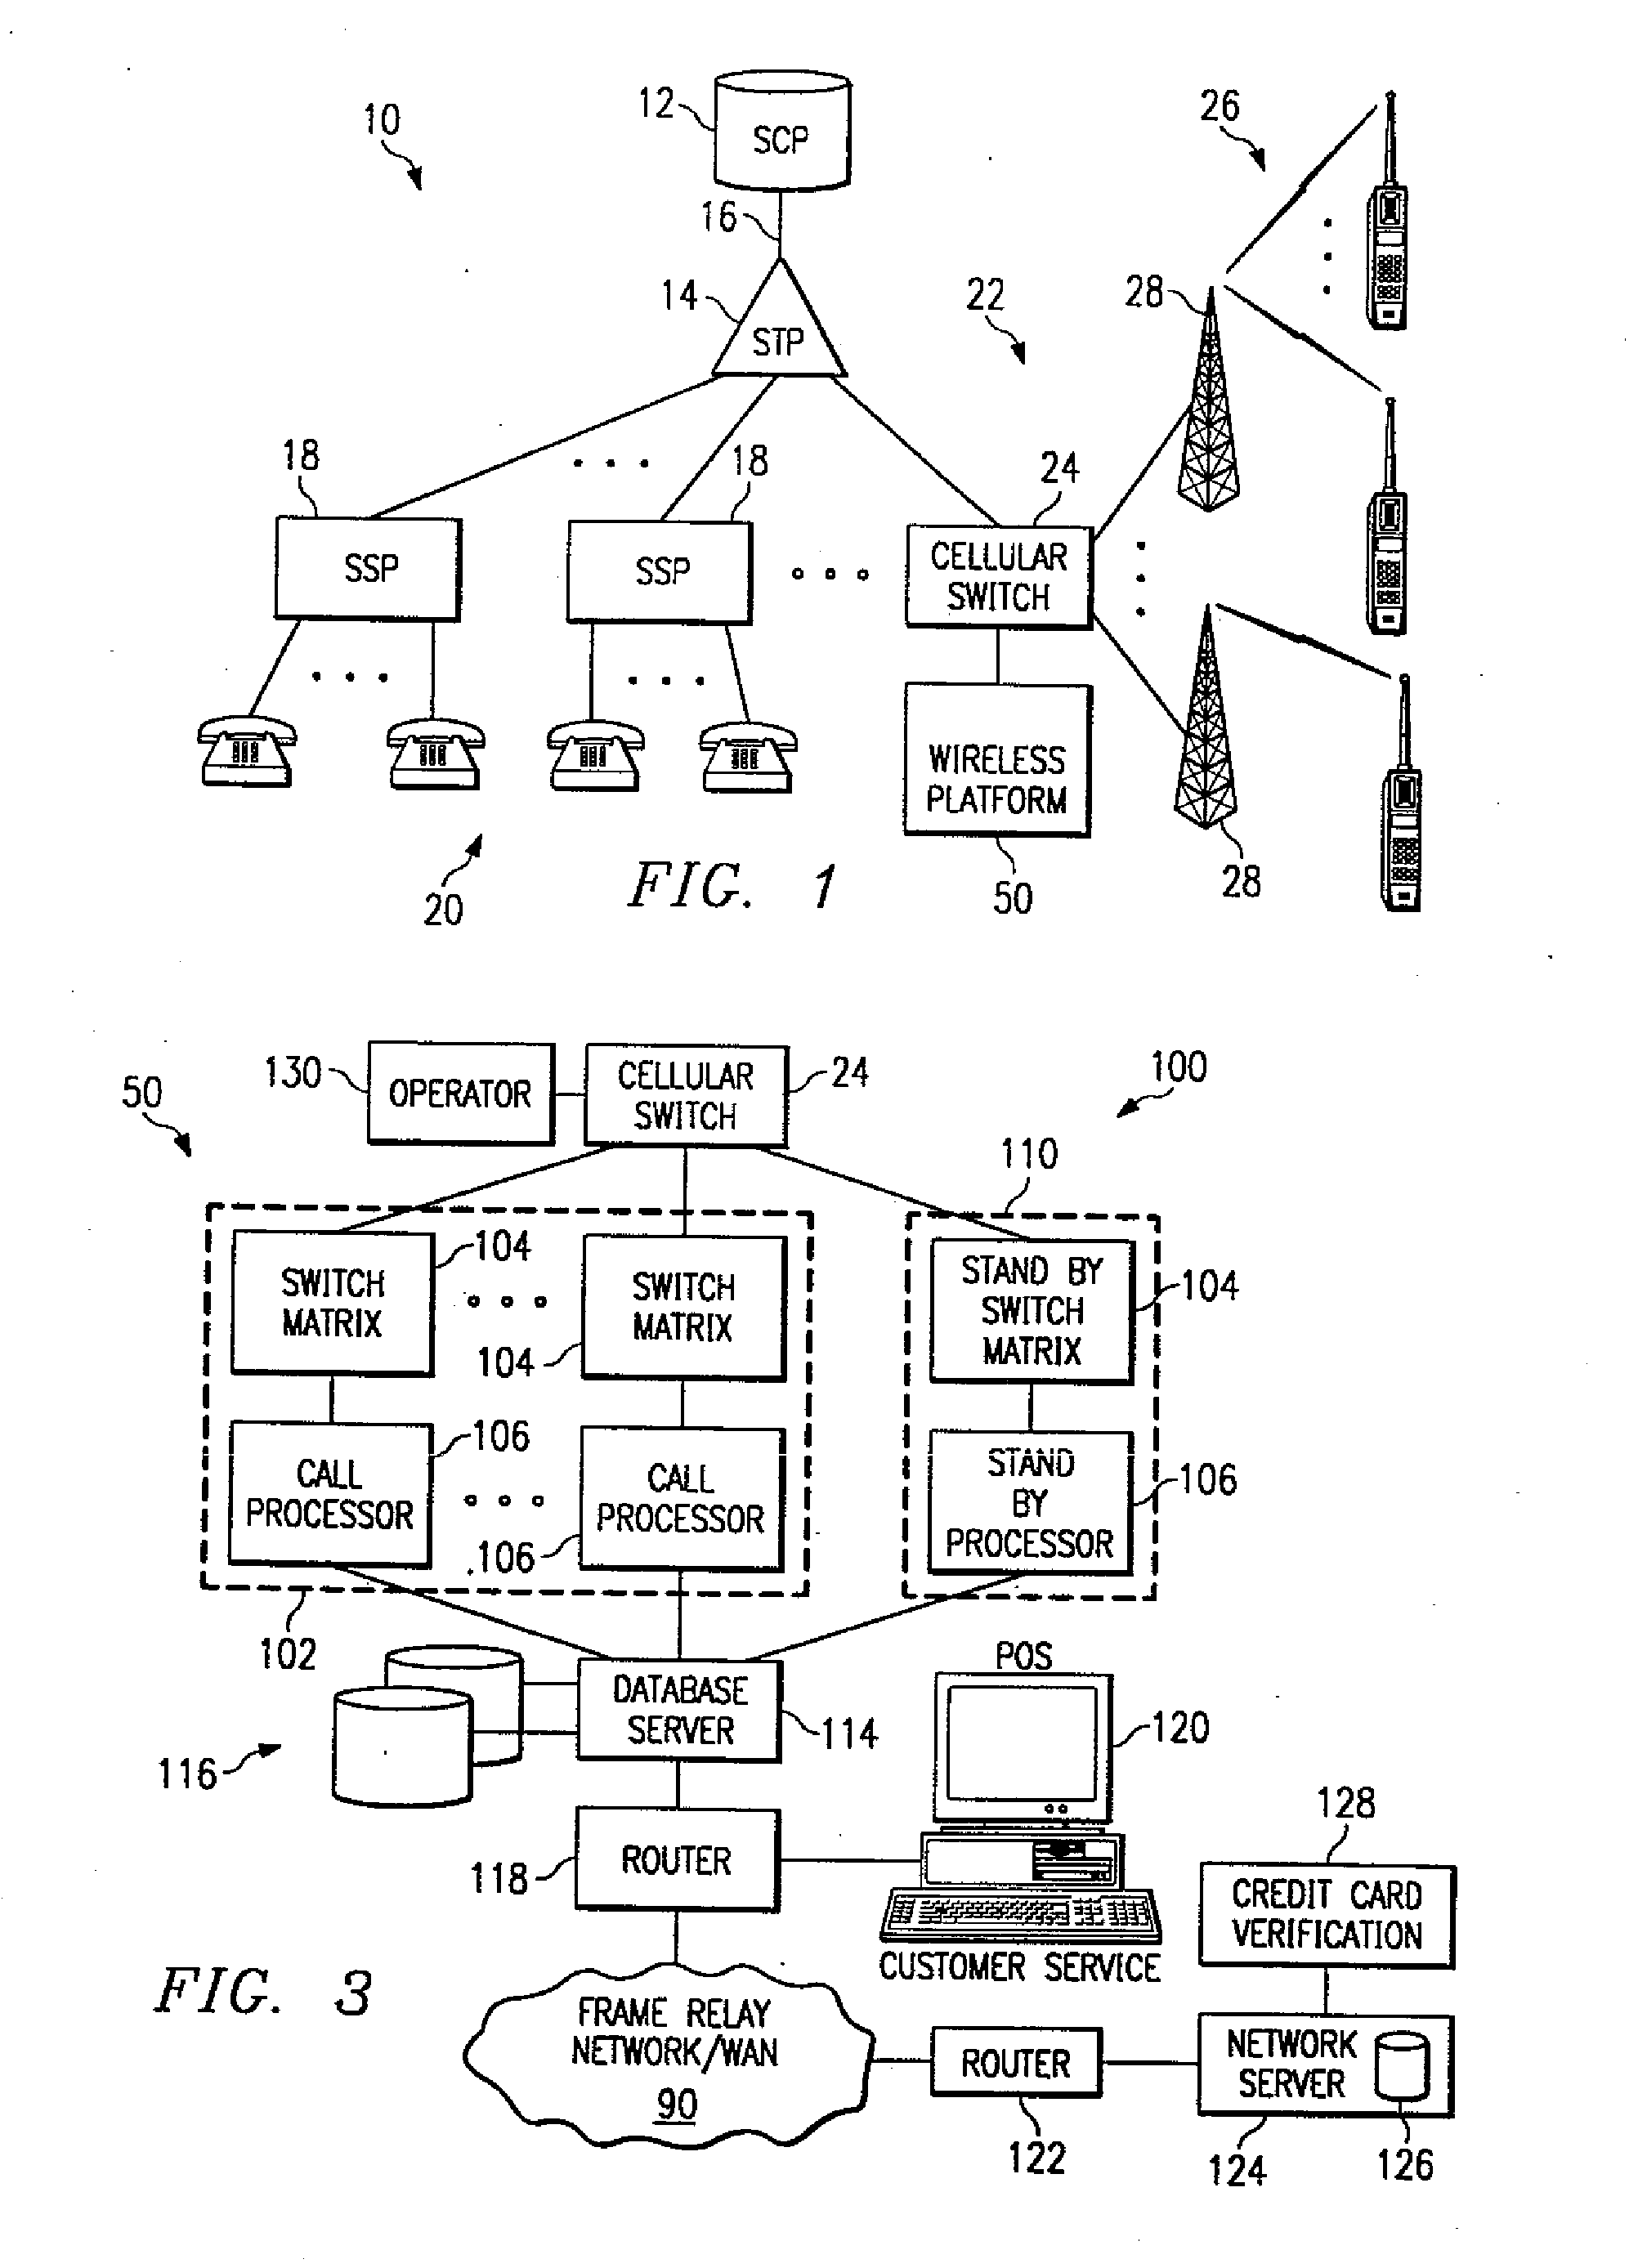 System and method of real-time call processing and billing